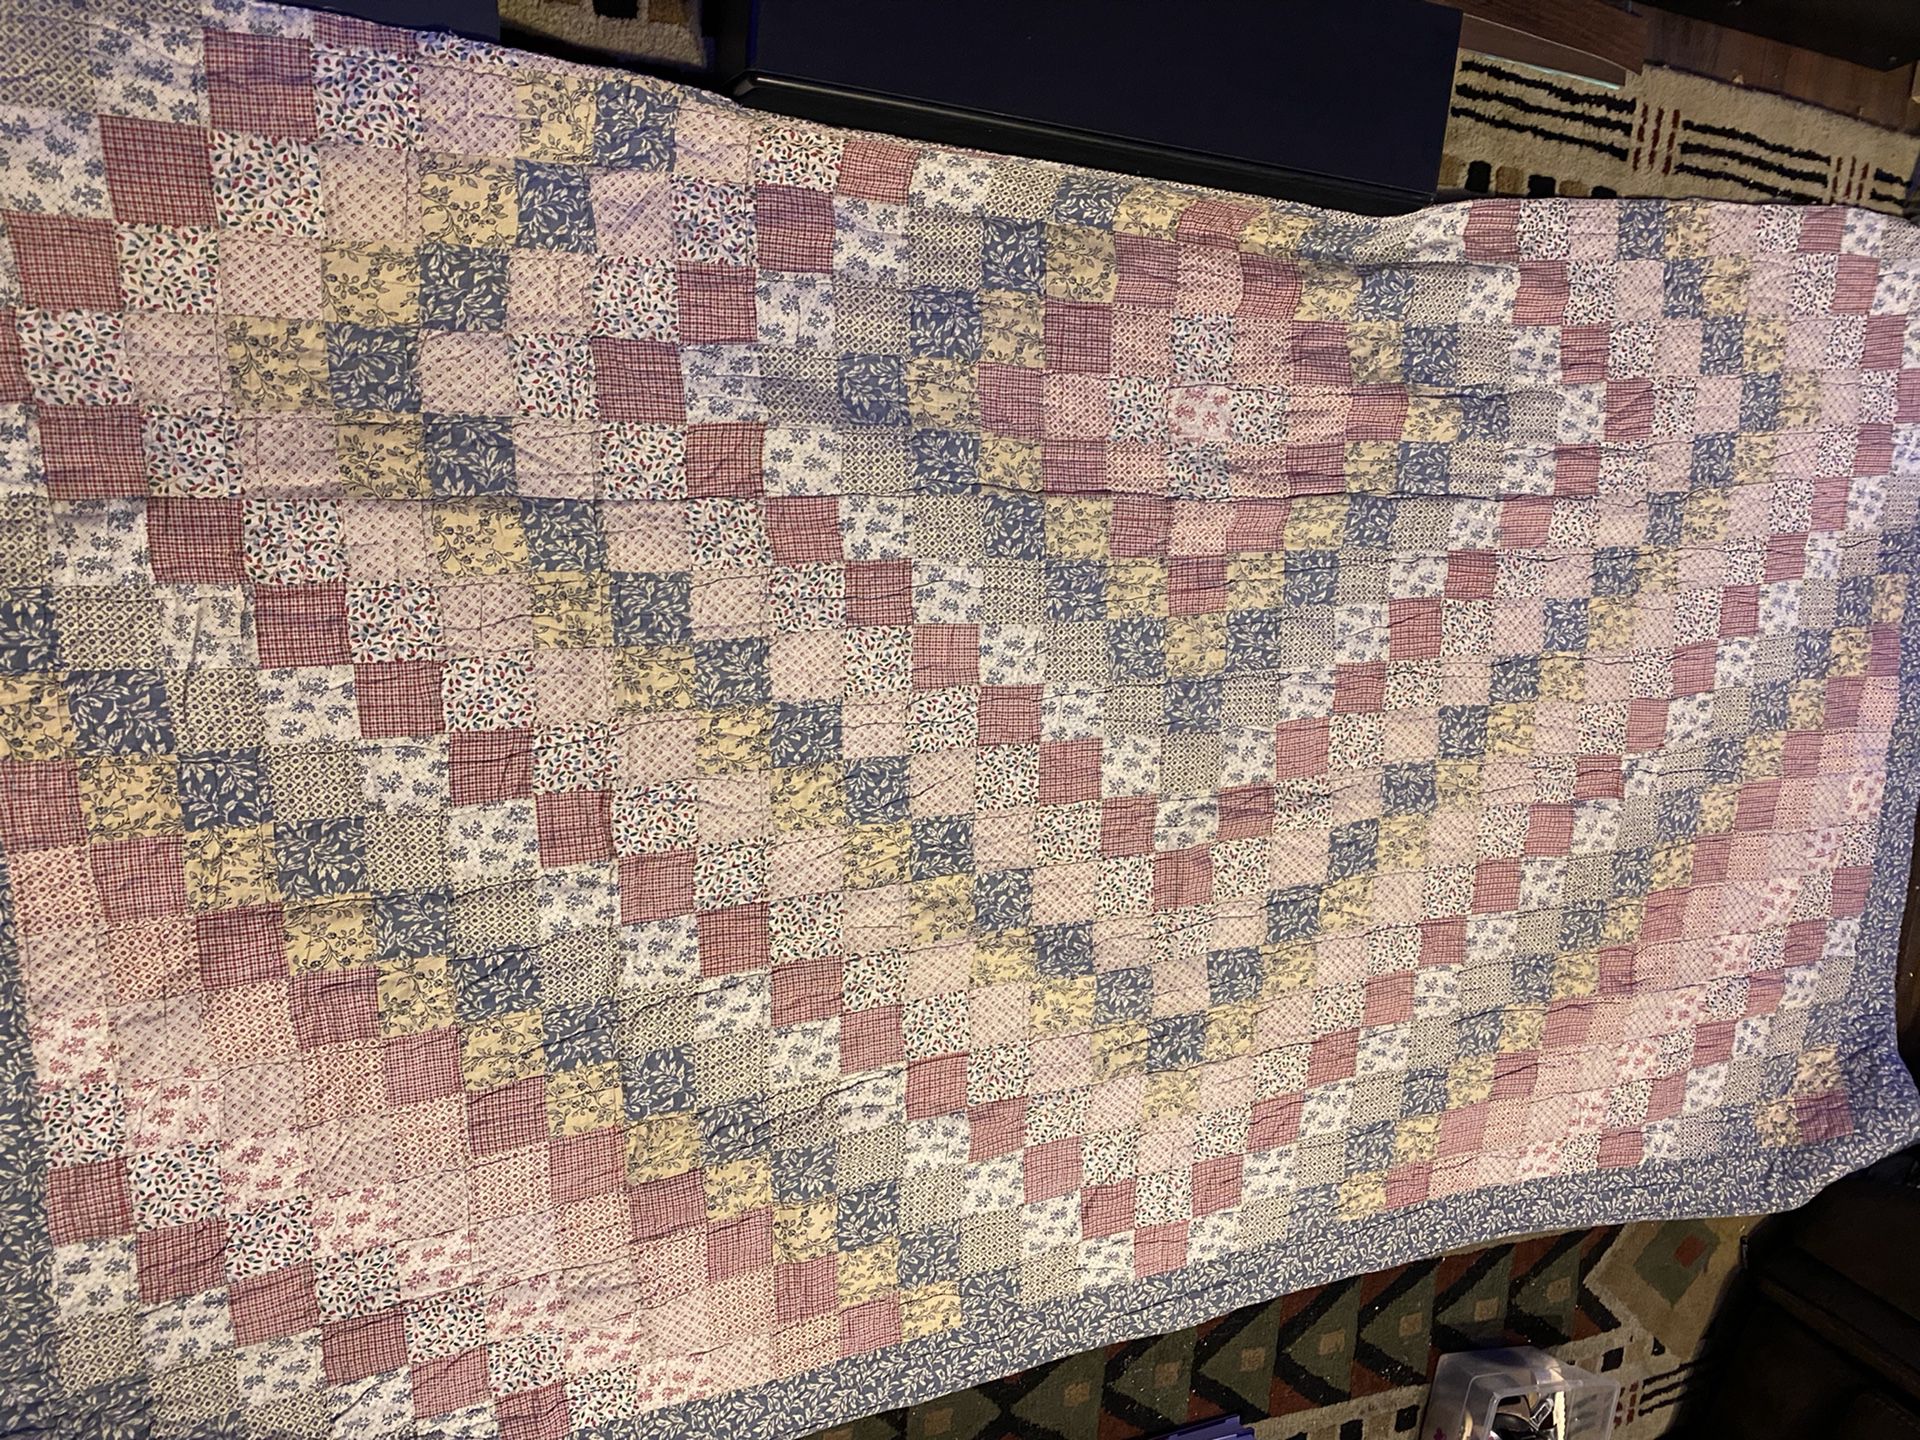 Hand Sewn Quilt- 46”wide x 80” long- beautiful